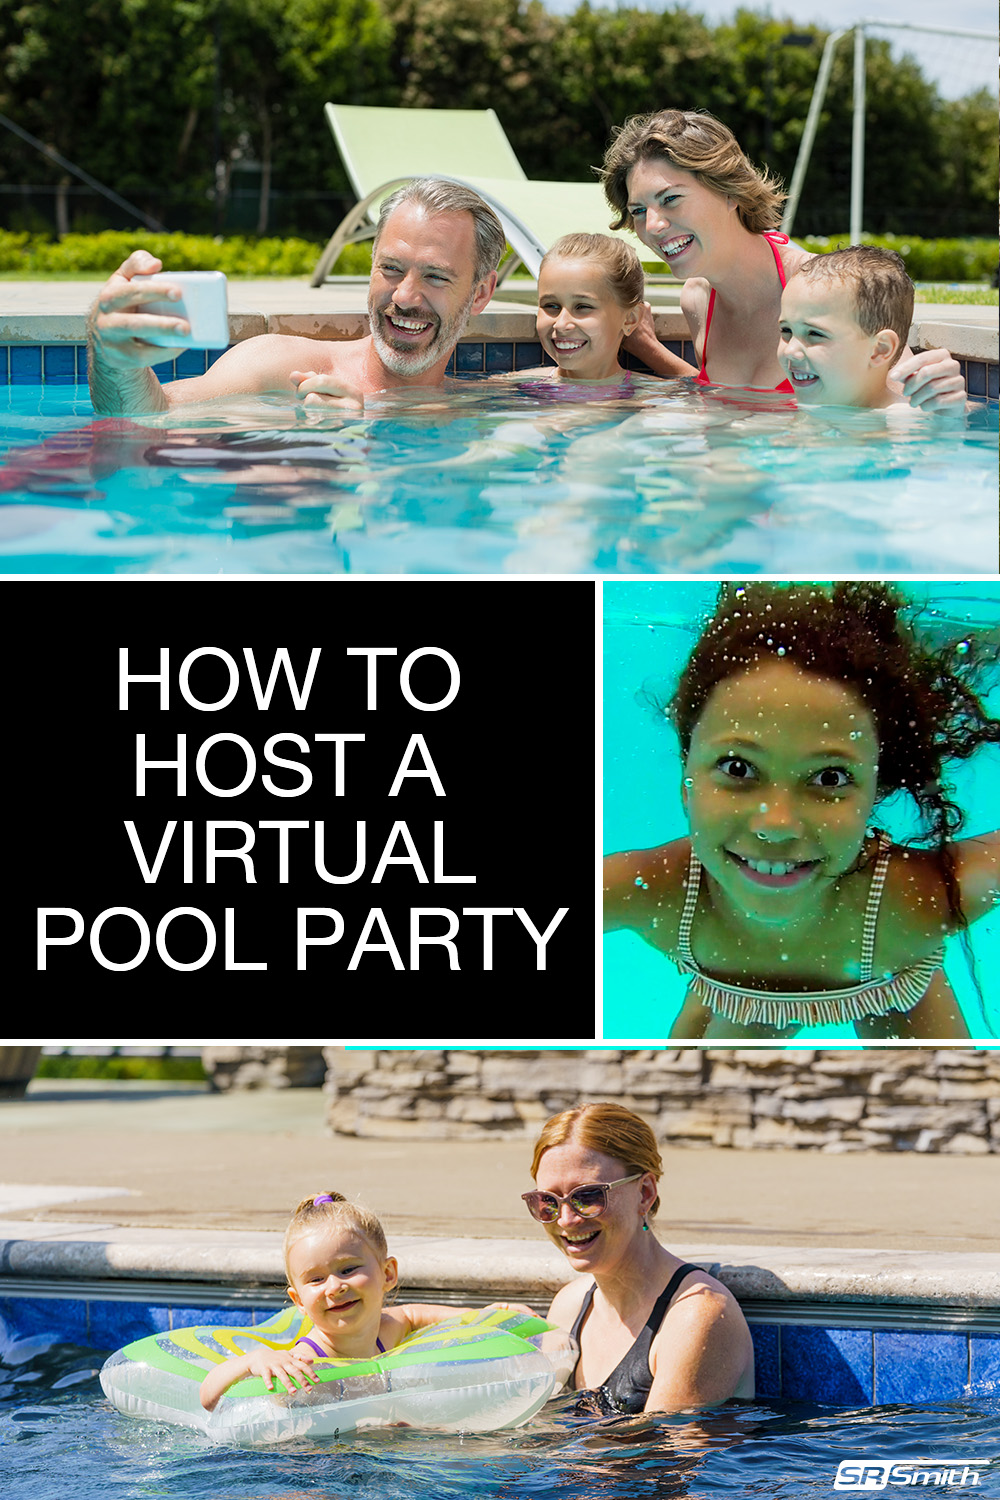 How to Host a Virtual Pool Party